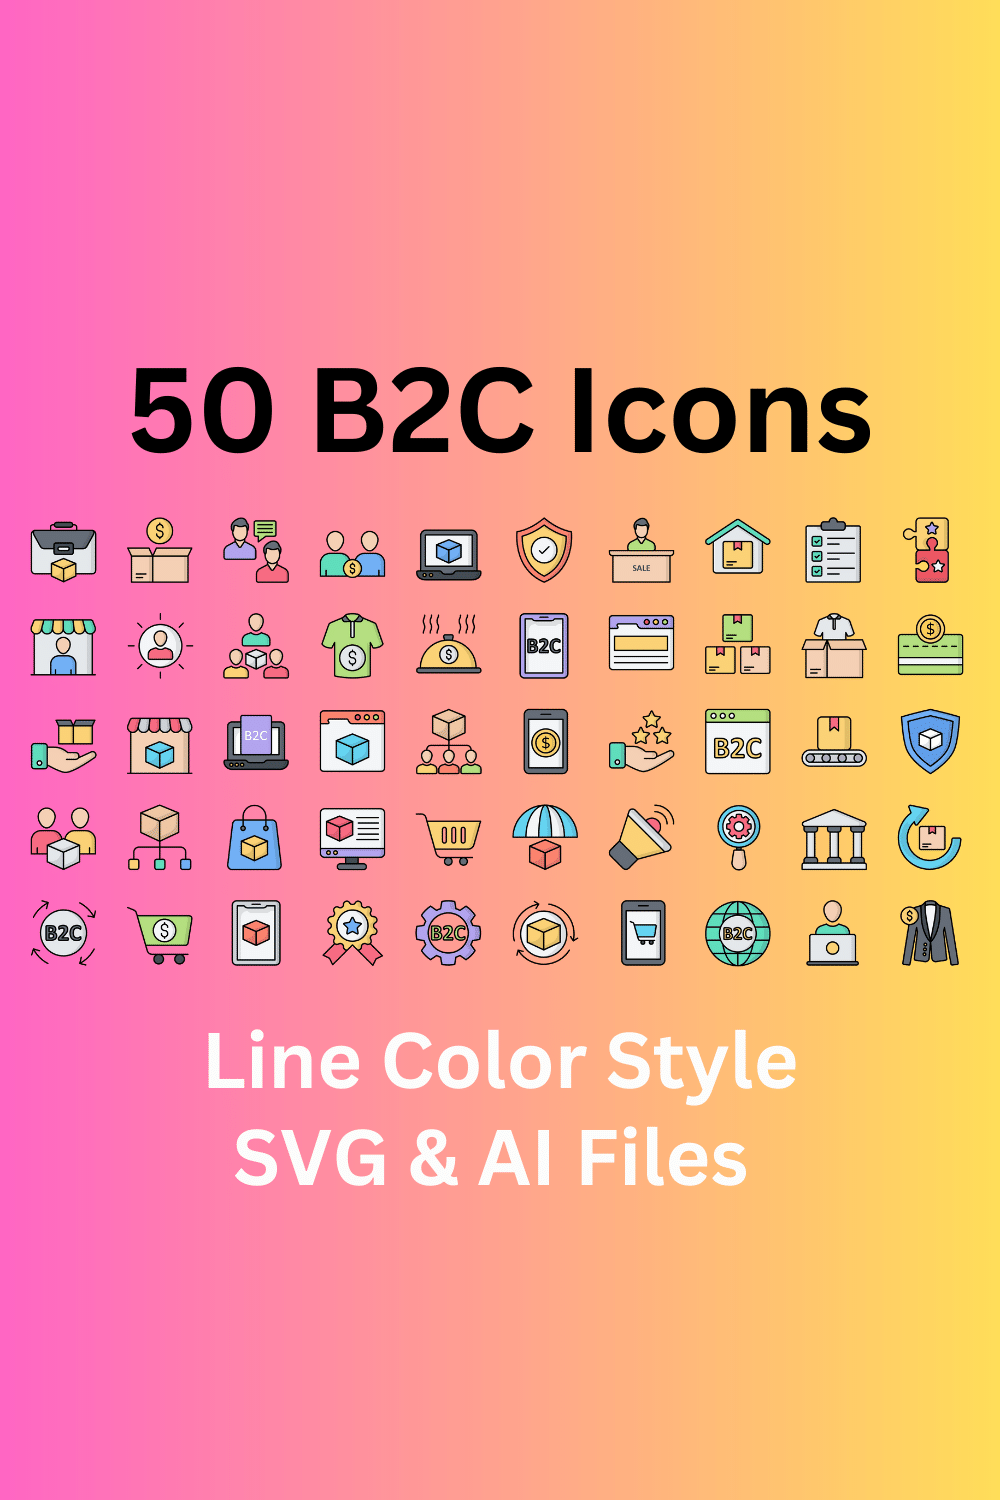 B2C Icon Set 50 Line Color Icons - SVG And AI Files pinterest preview image.